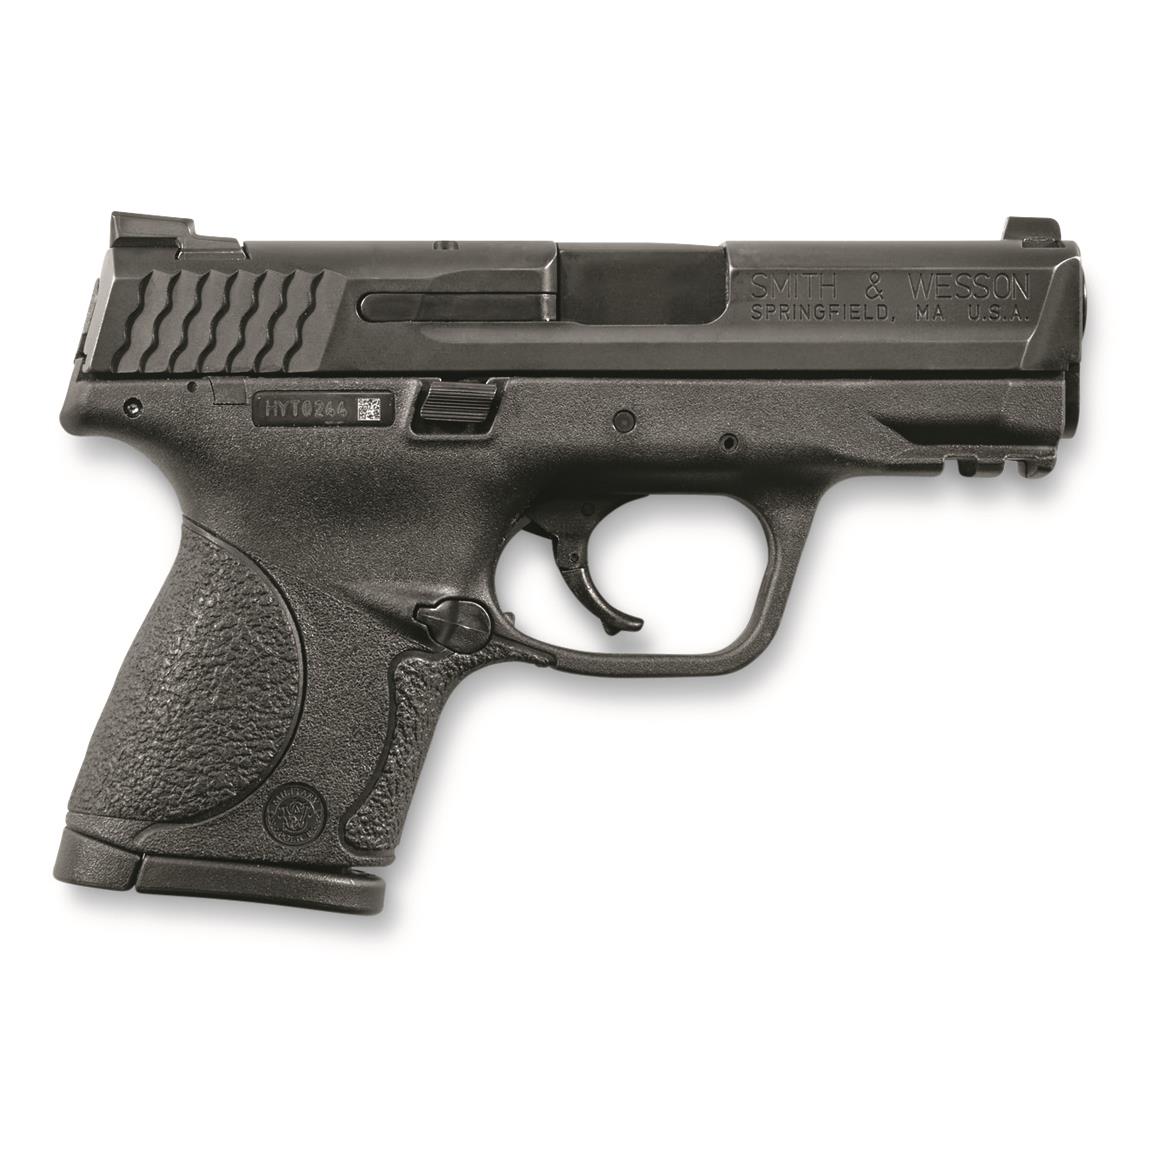 Smith & Wesson M&P9 Compact, Semi-auto, 9mm, 3.5" BBL, 12+1 Rds., No Thumb Safety, Used Law Enf.